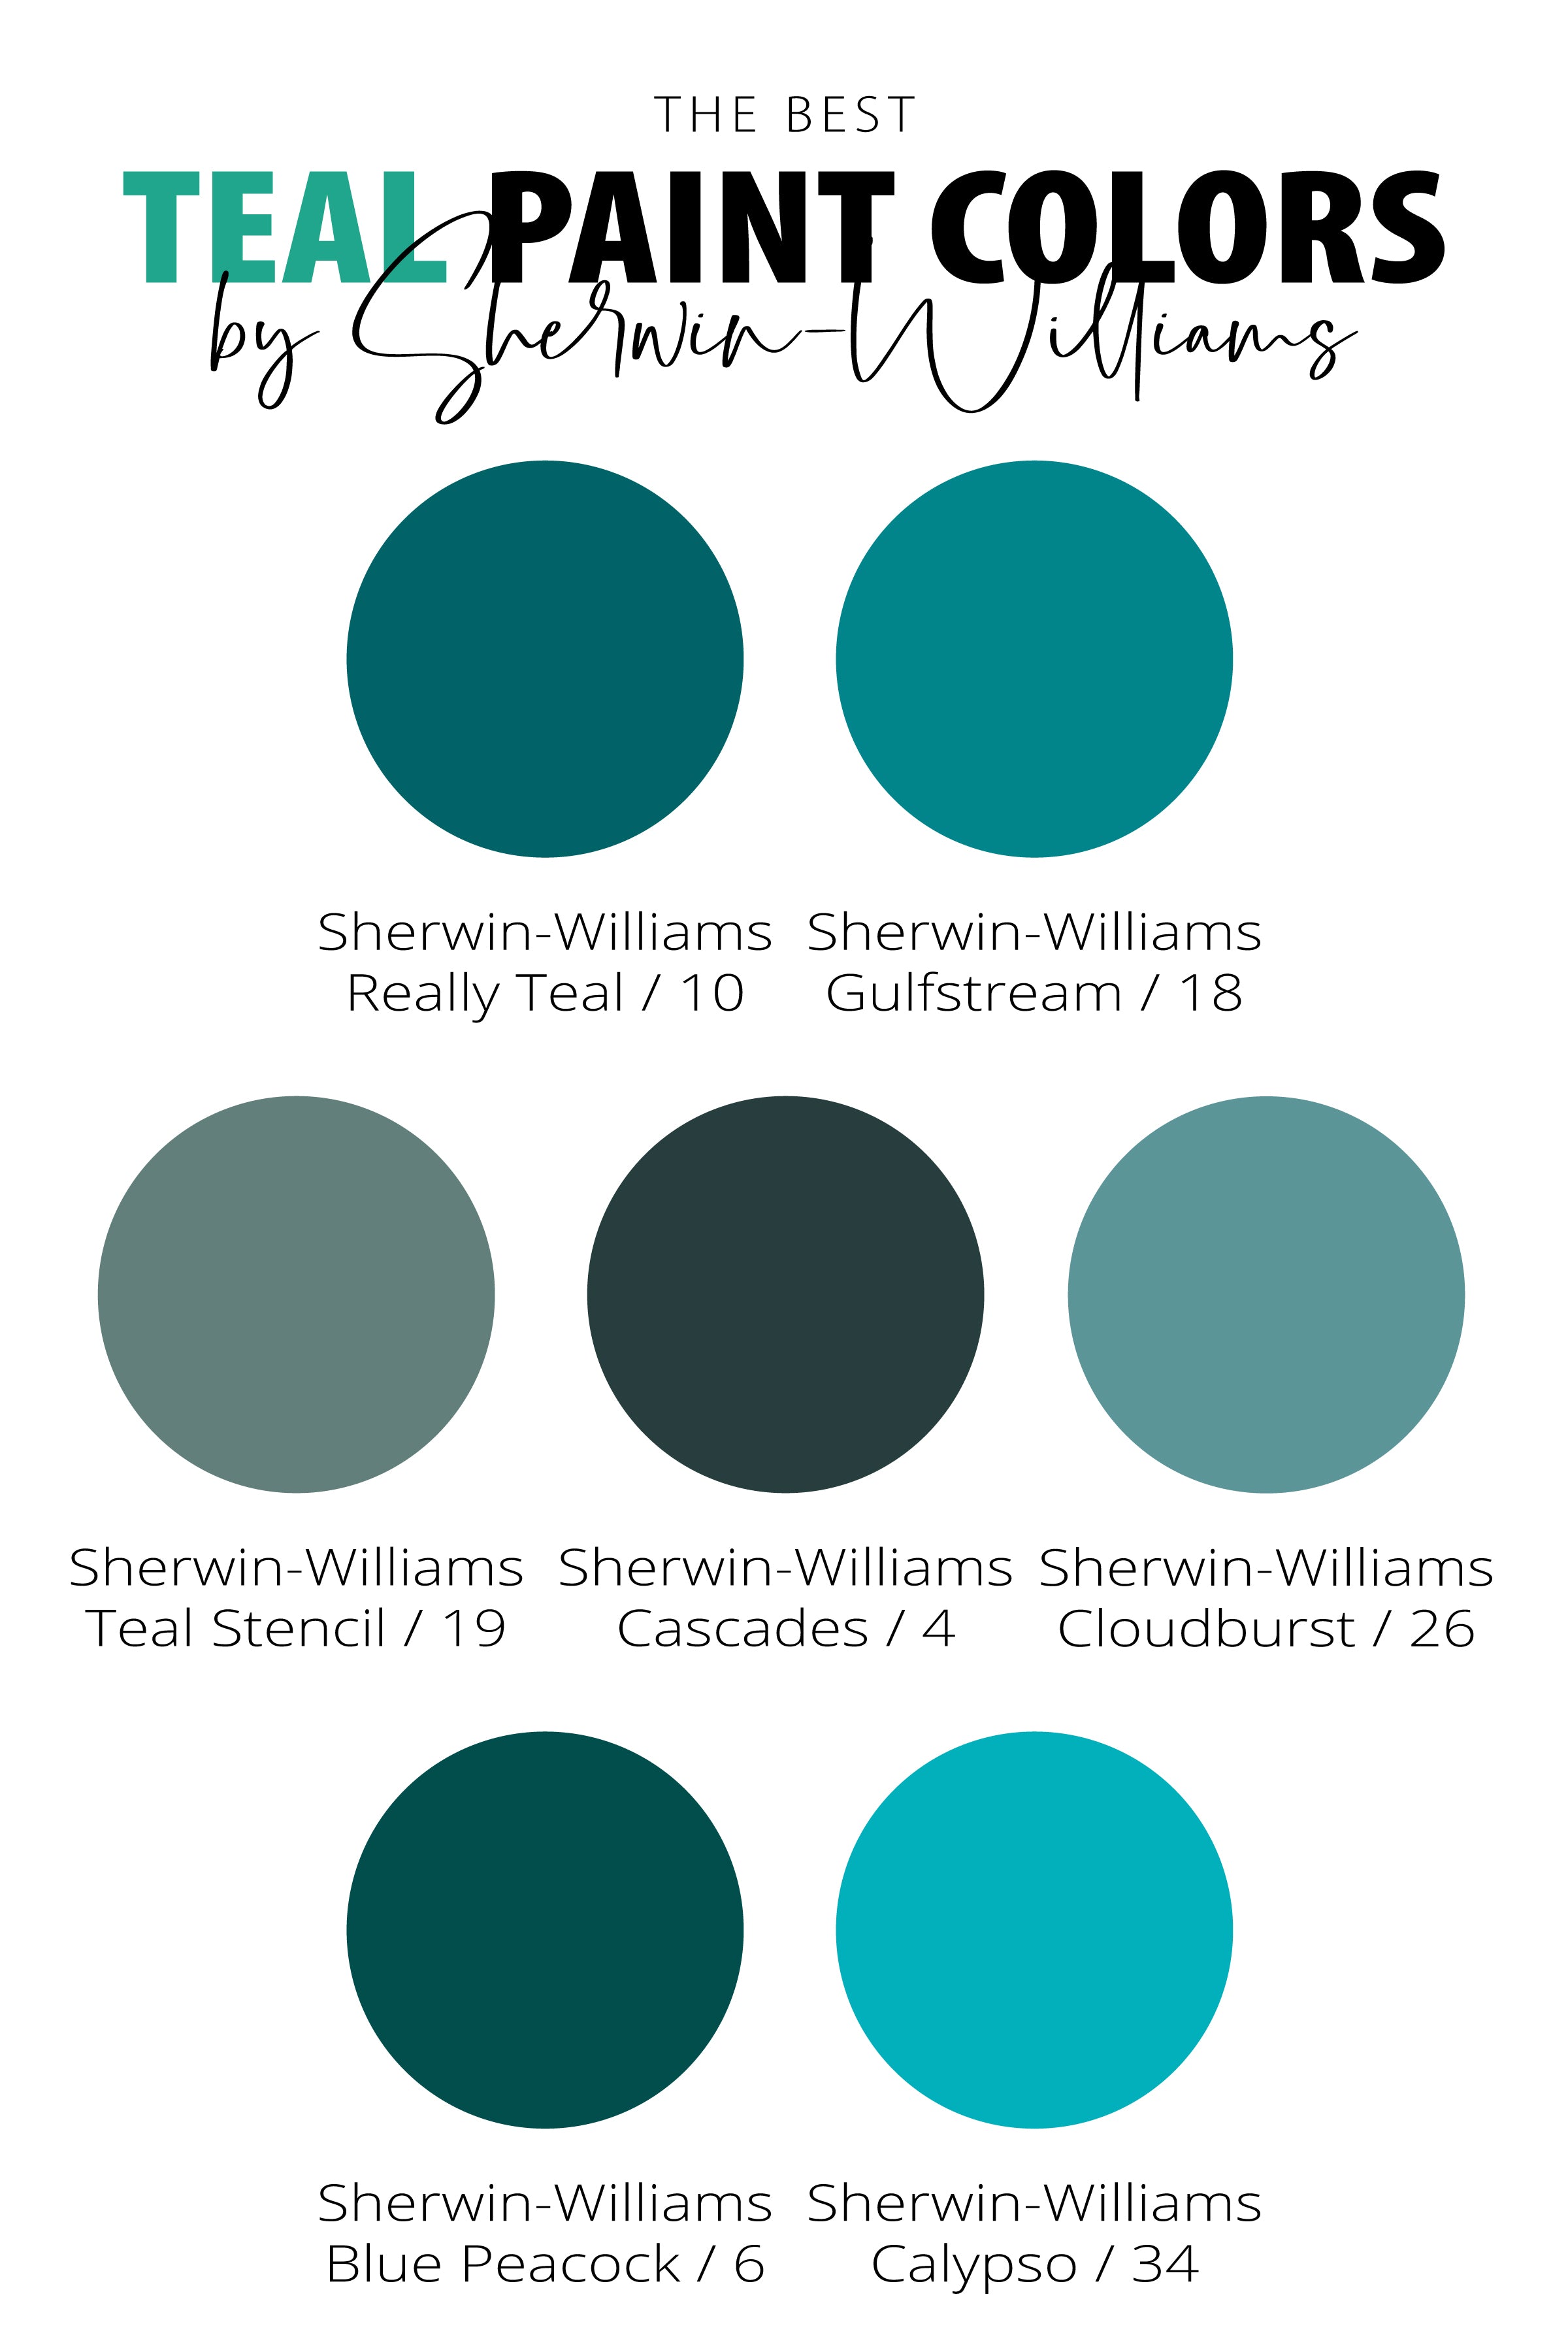 Best-Teal-Paint-Colors-with-Names-Colors-LRV-values-by-Sherwin-Williams